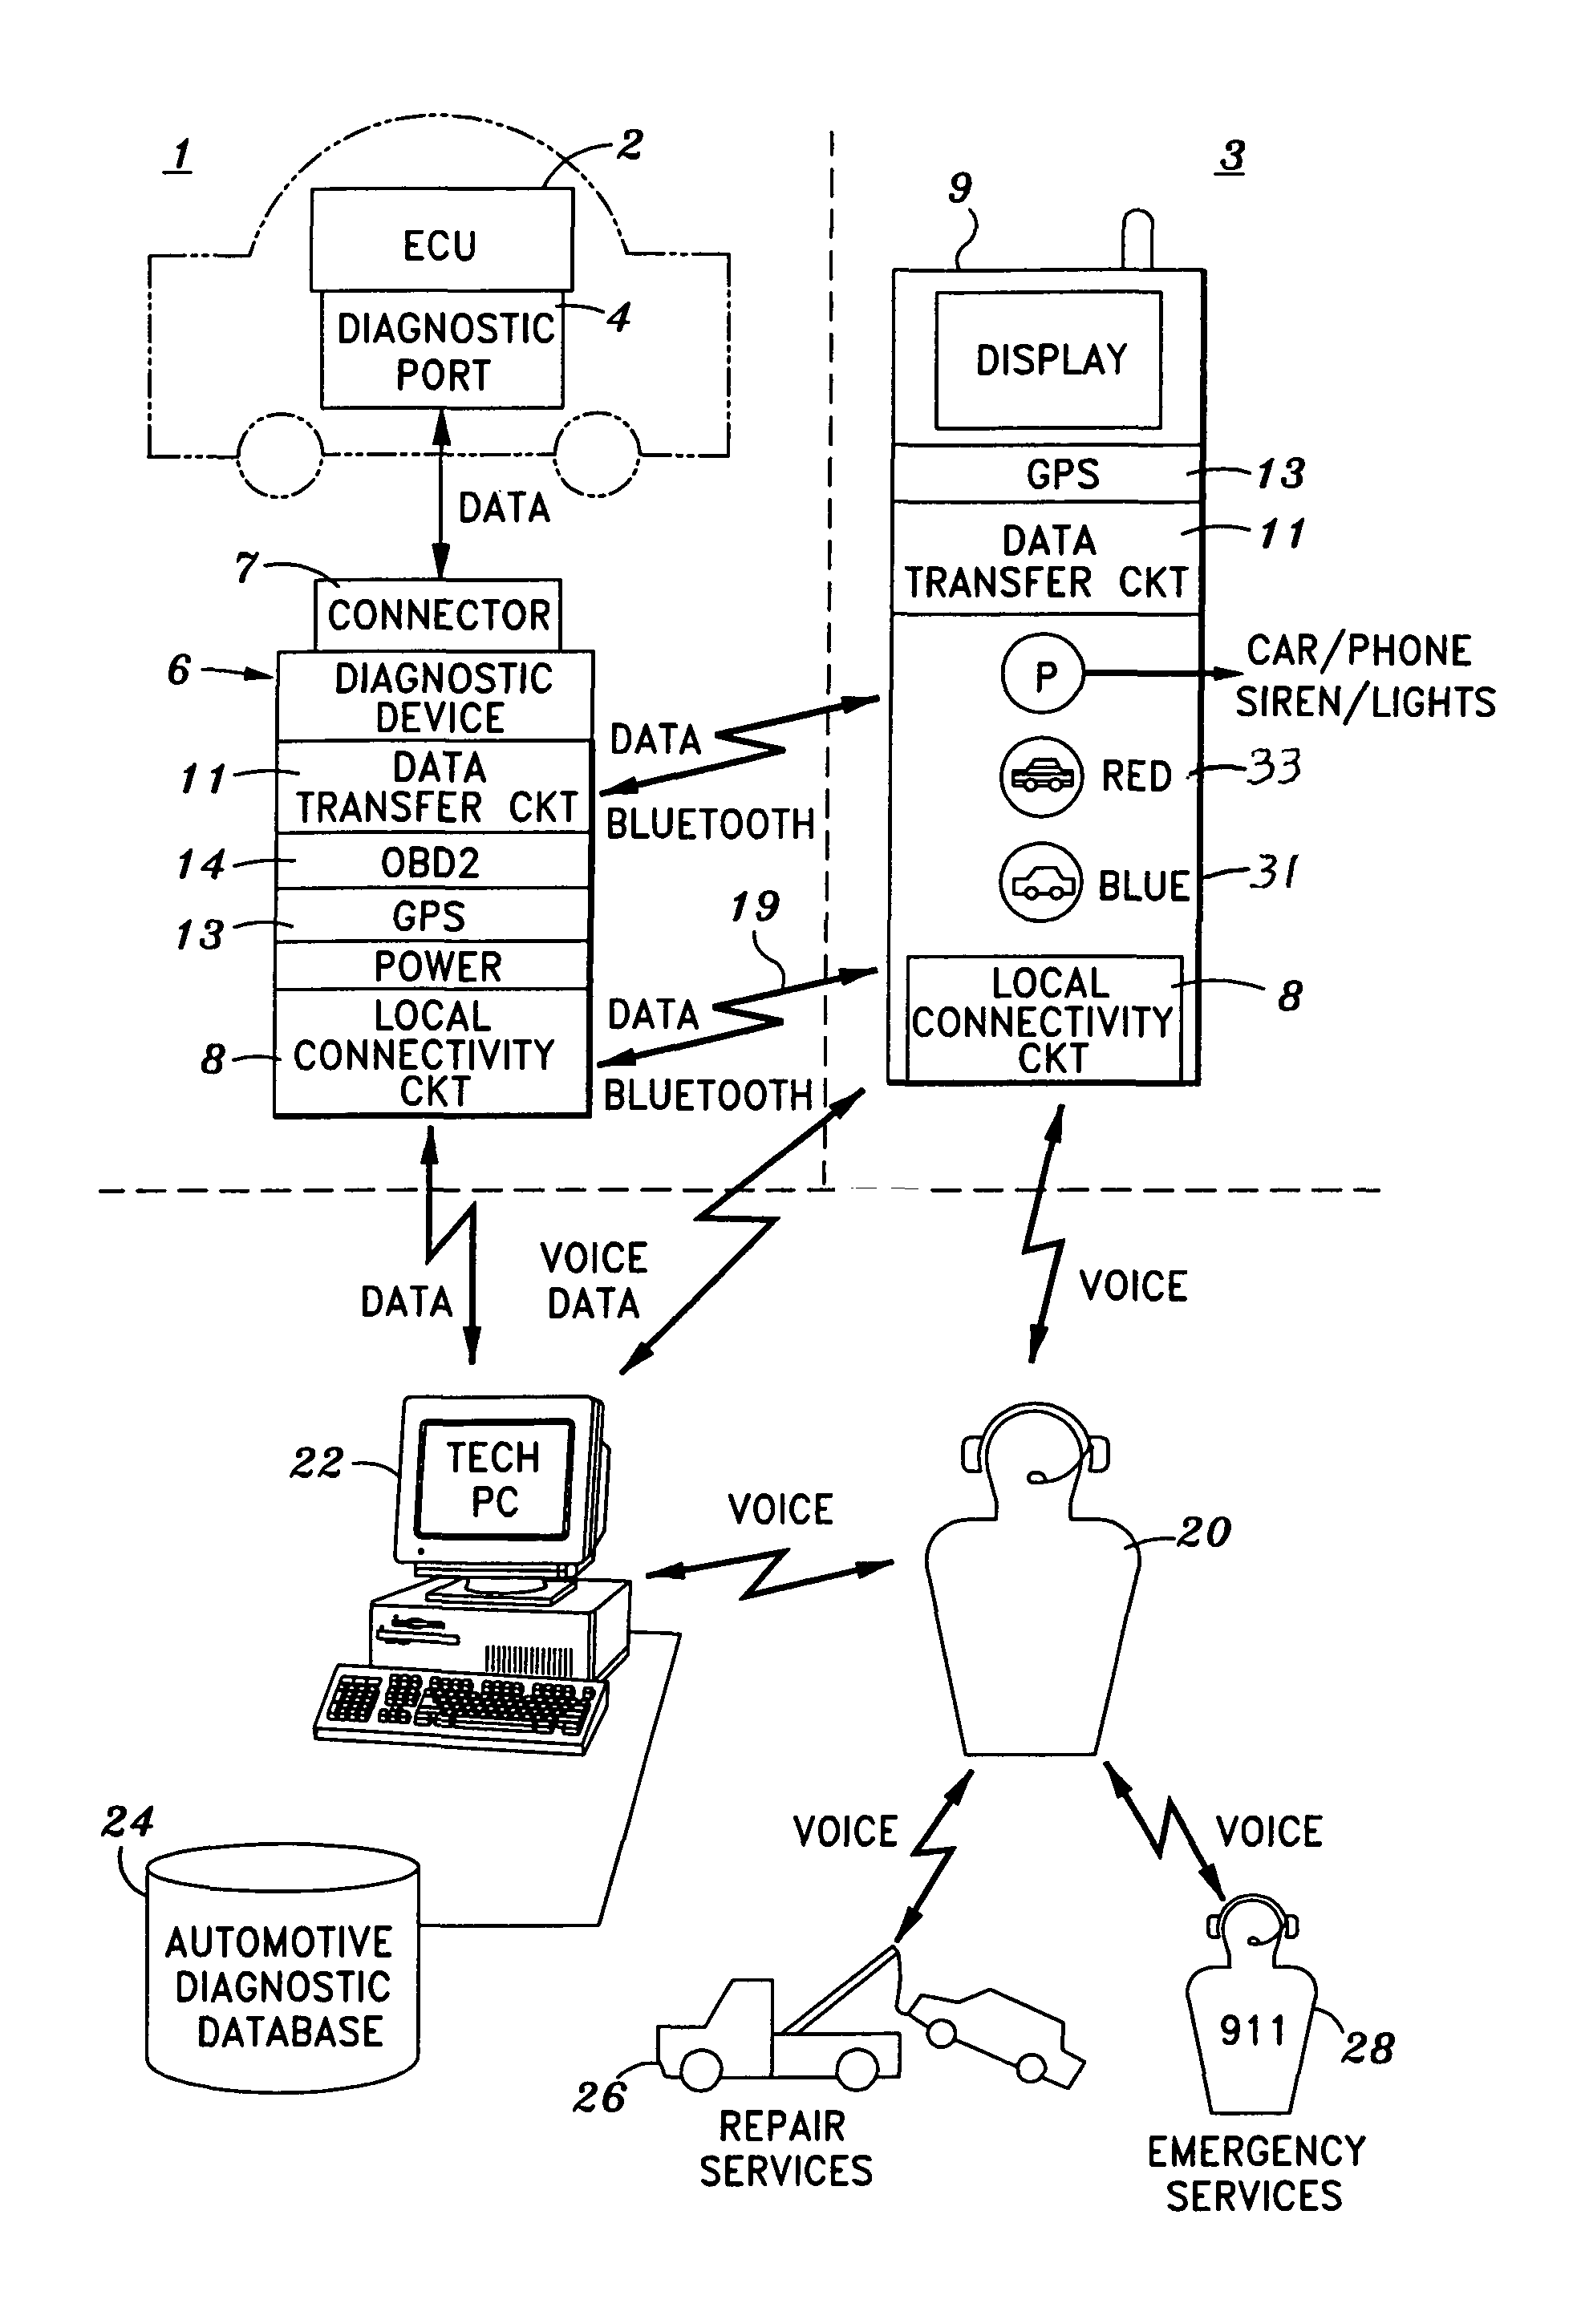 Cellphone based vehicle diagnostic system